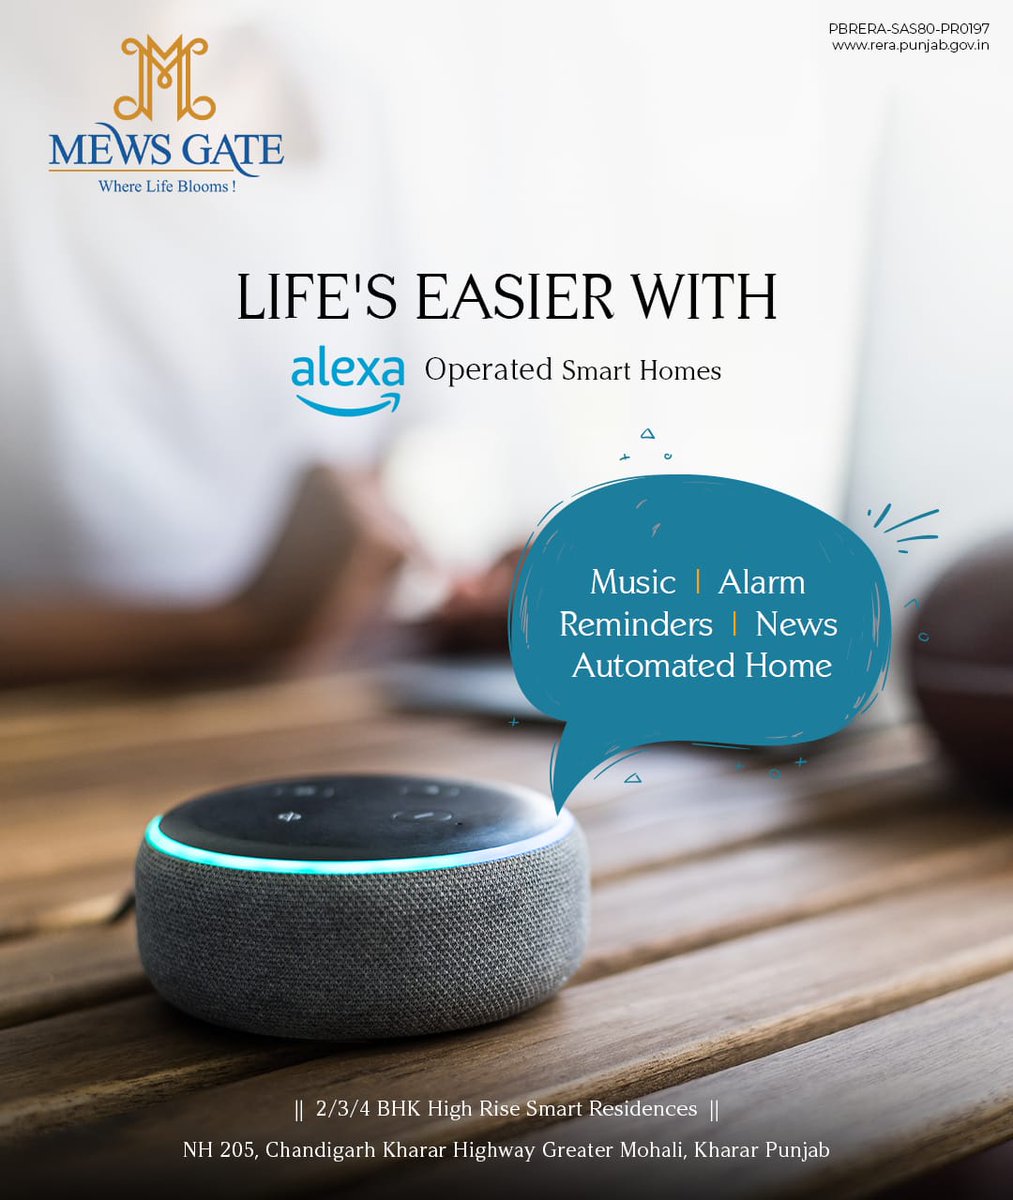 Welcome to Mews Gate, where Alexa turns your home into a haven of efficiency and comfort. 🏠2/3/4 BHK Alexa-Operated Smart Residences 📞Call us at 90695-90695 #MewsGate #AlexaHomes #Alexa #SmartHomes #SmartLiving #Command #Comfort #SmartResidences #Residential #Kharar